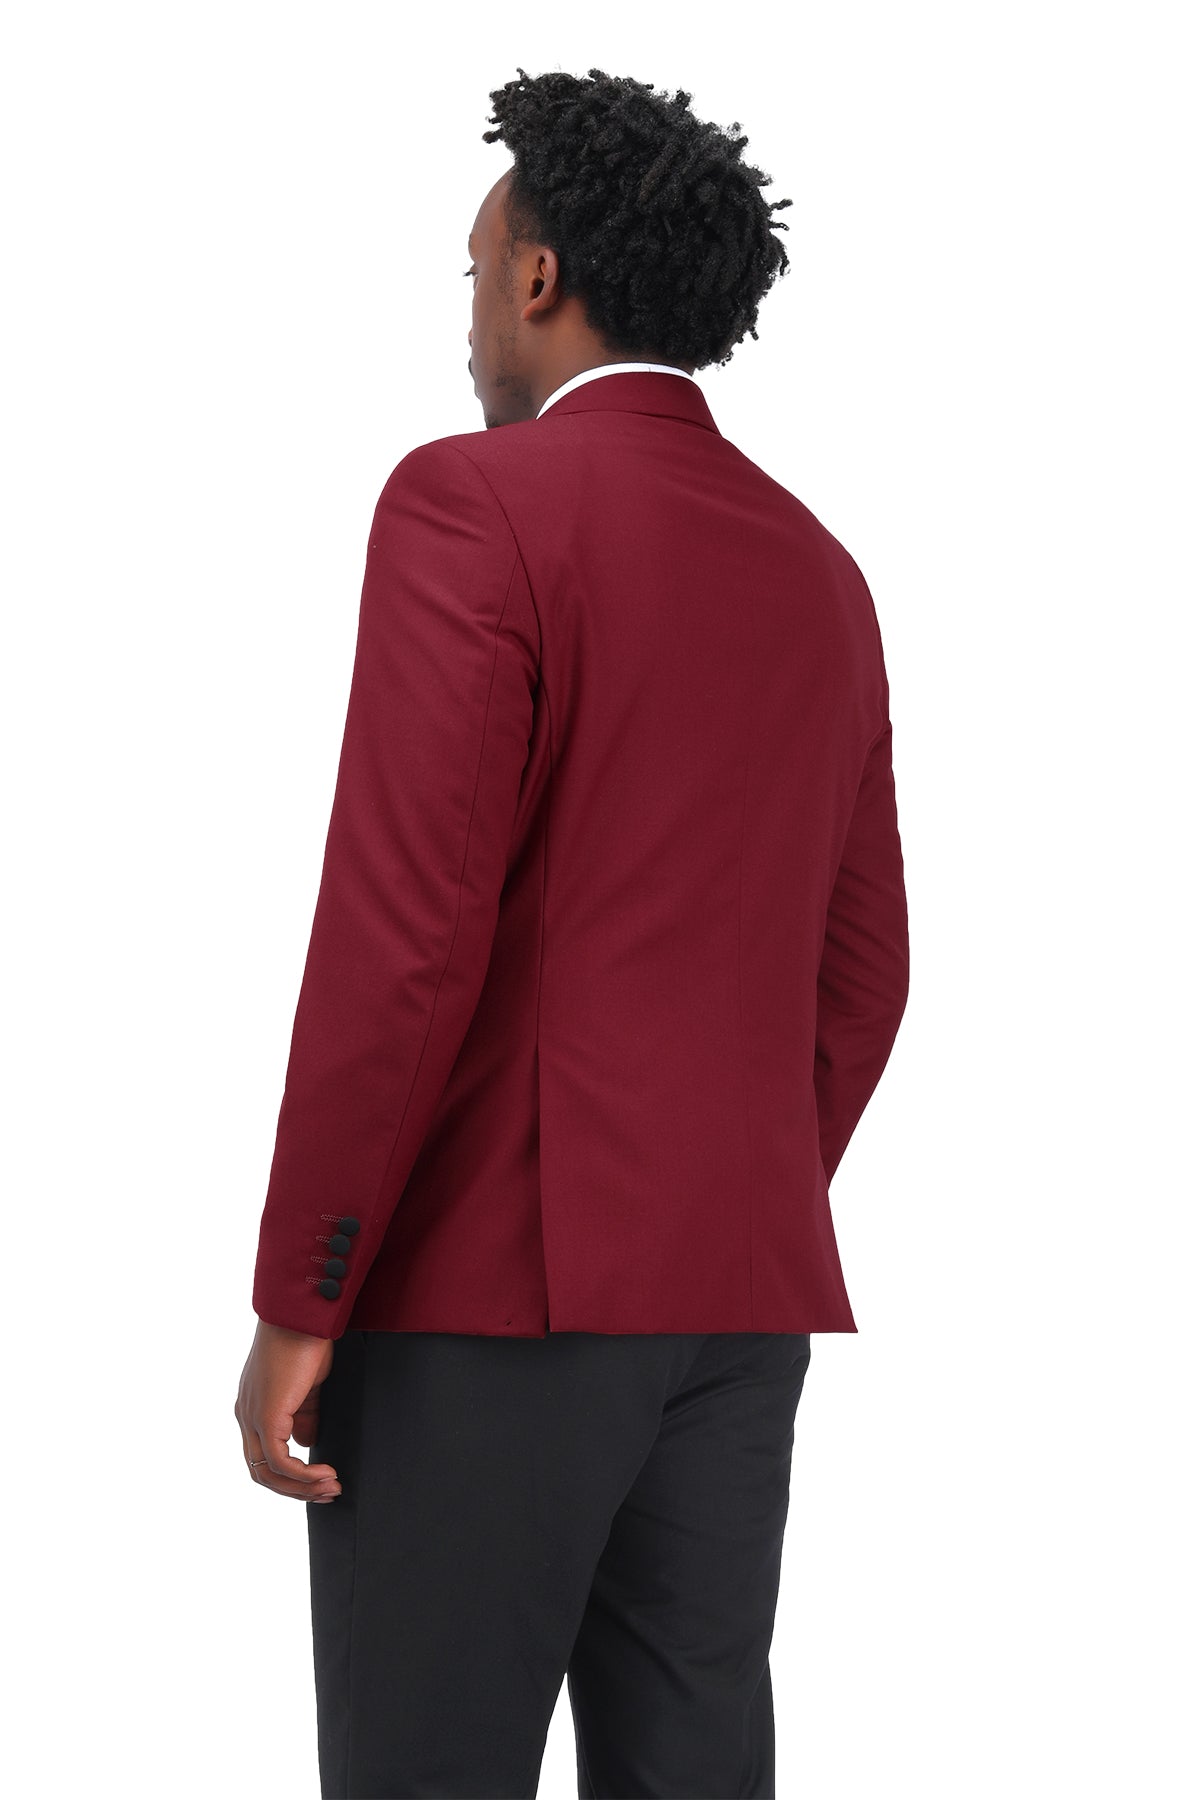 3 Piece Men's Suits One Button Slim Fit Peaked Lapel Tuxedo Wine Red